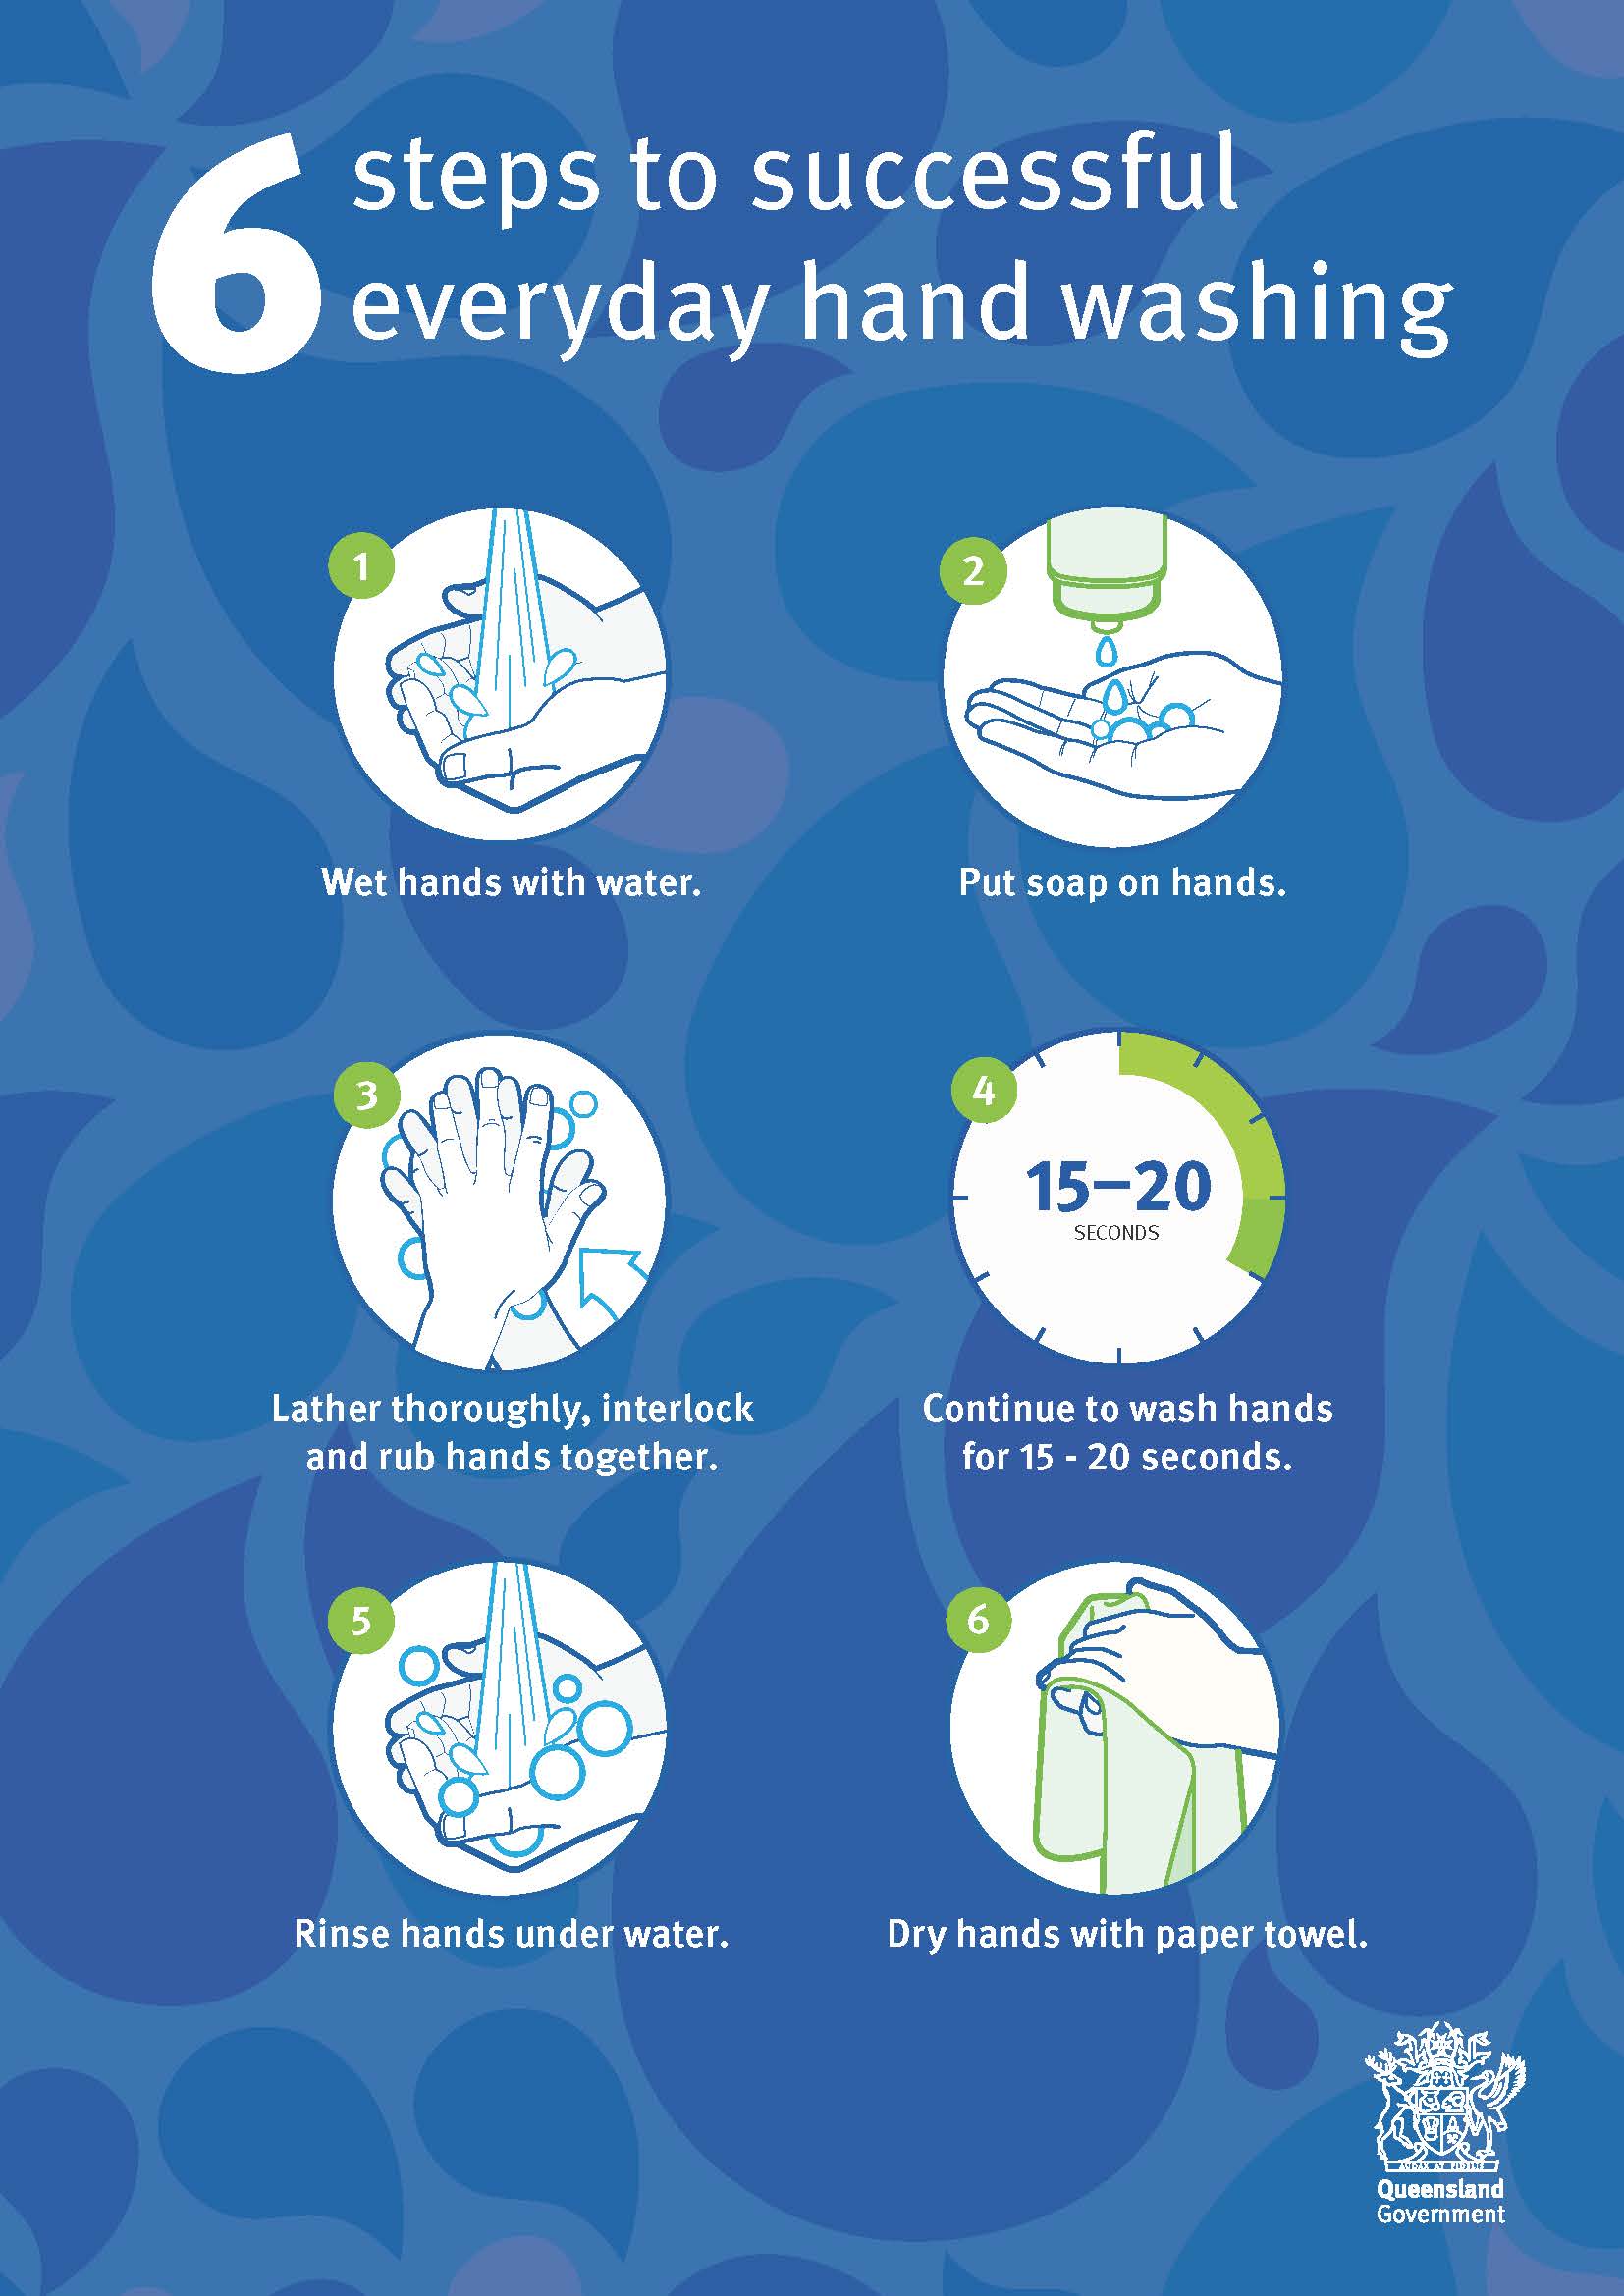 6 steps to successful every day hand washing 1. wet hands with water, 2. put soap on hands 3. lather thoroughly, interlock and rub hands together, 4. continue to wash hands for 15-20 seconds, 5. rinse hands under water 6. dry hands with paper towel